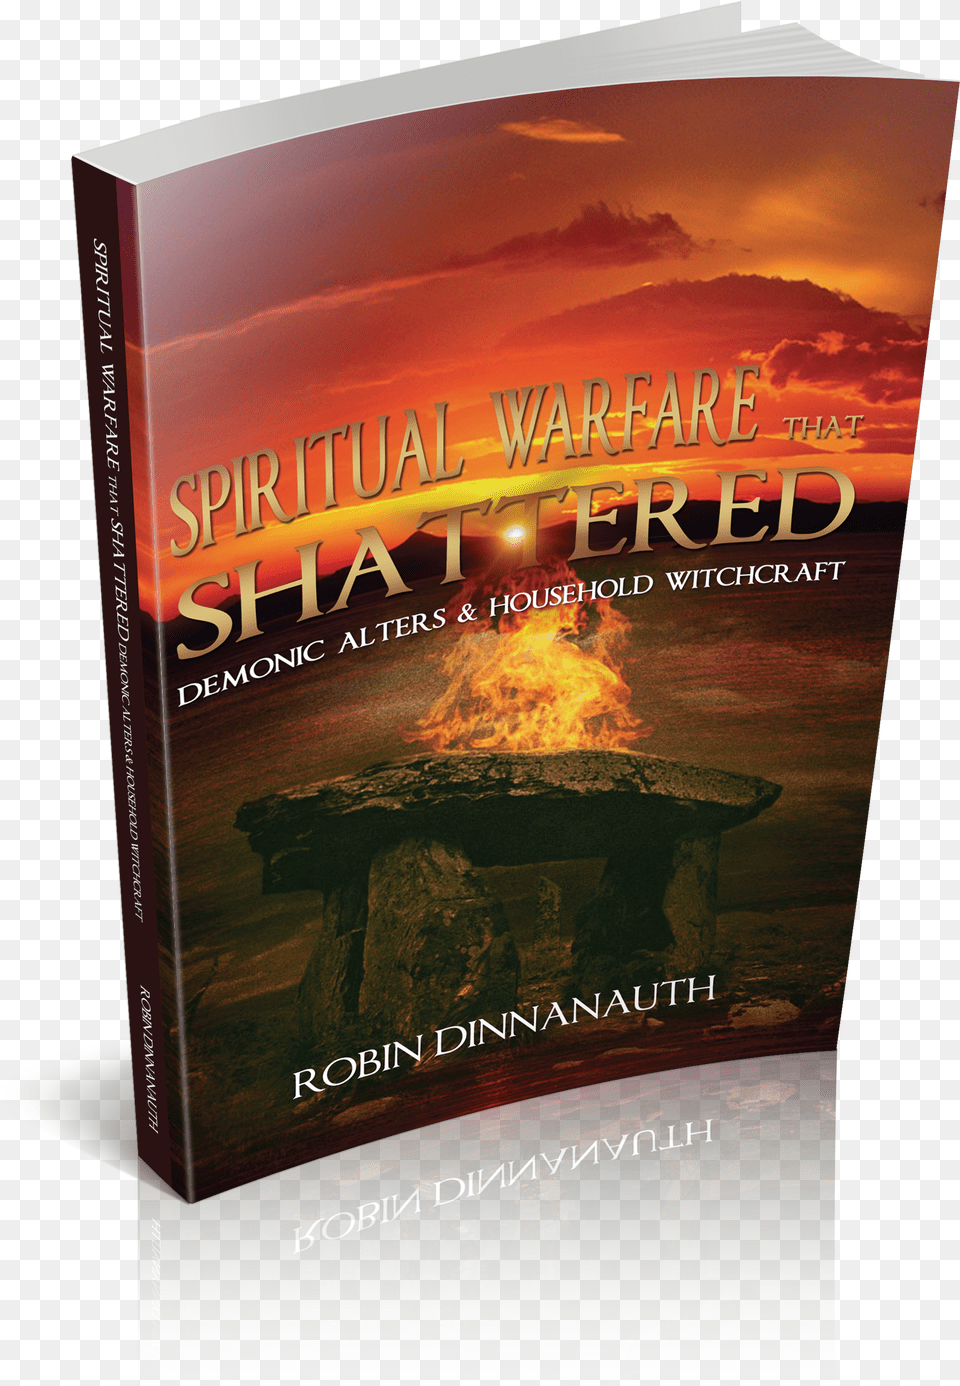 Spiritual Warfare That Shattered Flyer Png